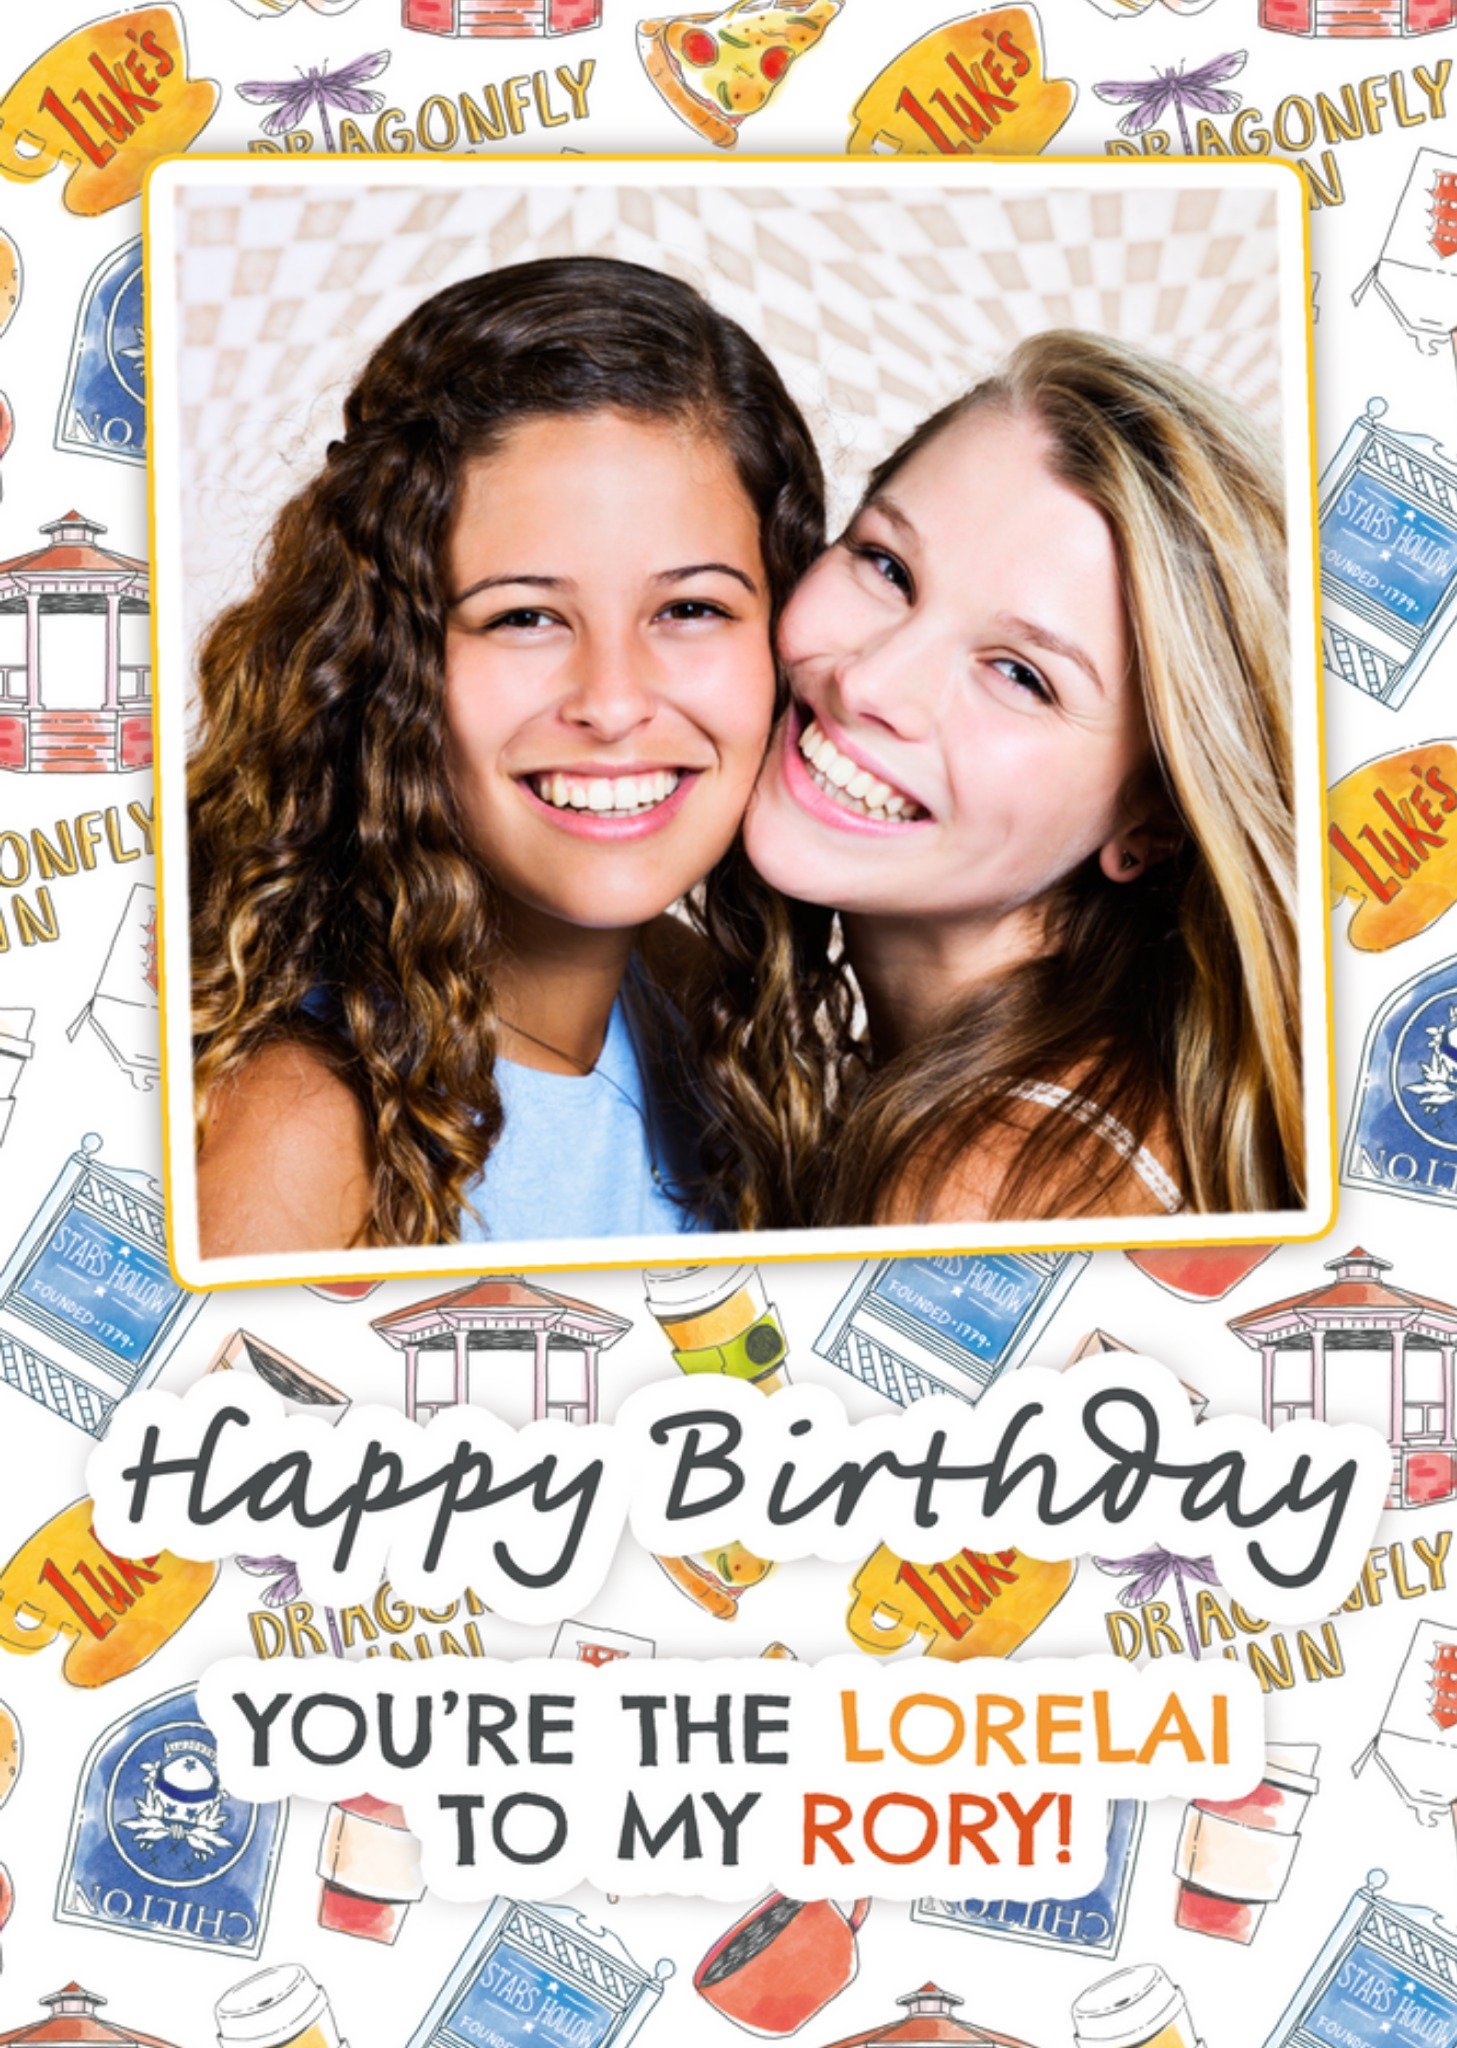 Moonpig Gilmore Girls You're The Lorelai To My Rory Photo Upload Birthday Card, Large